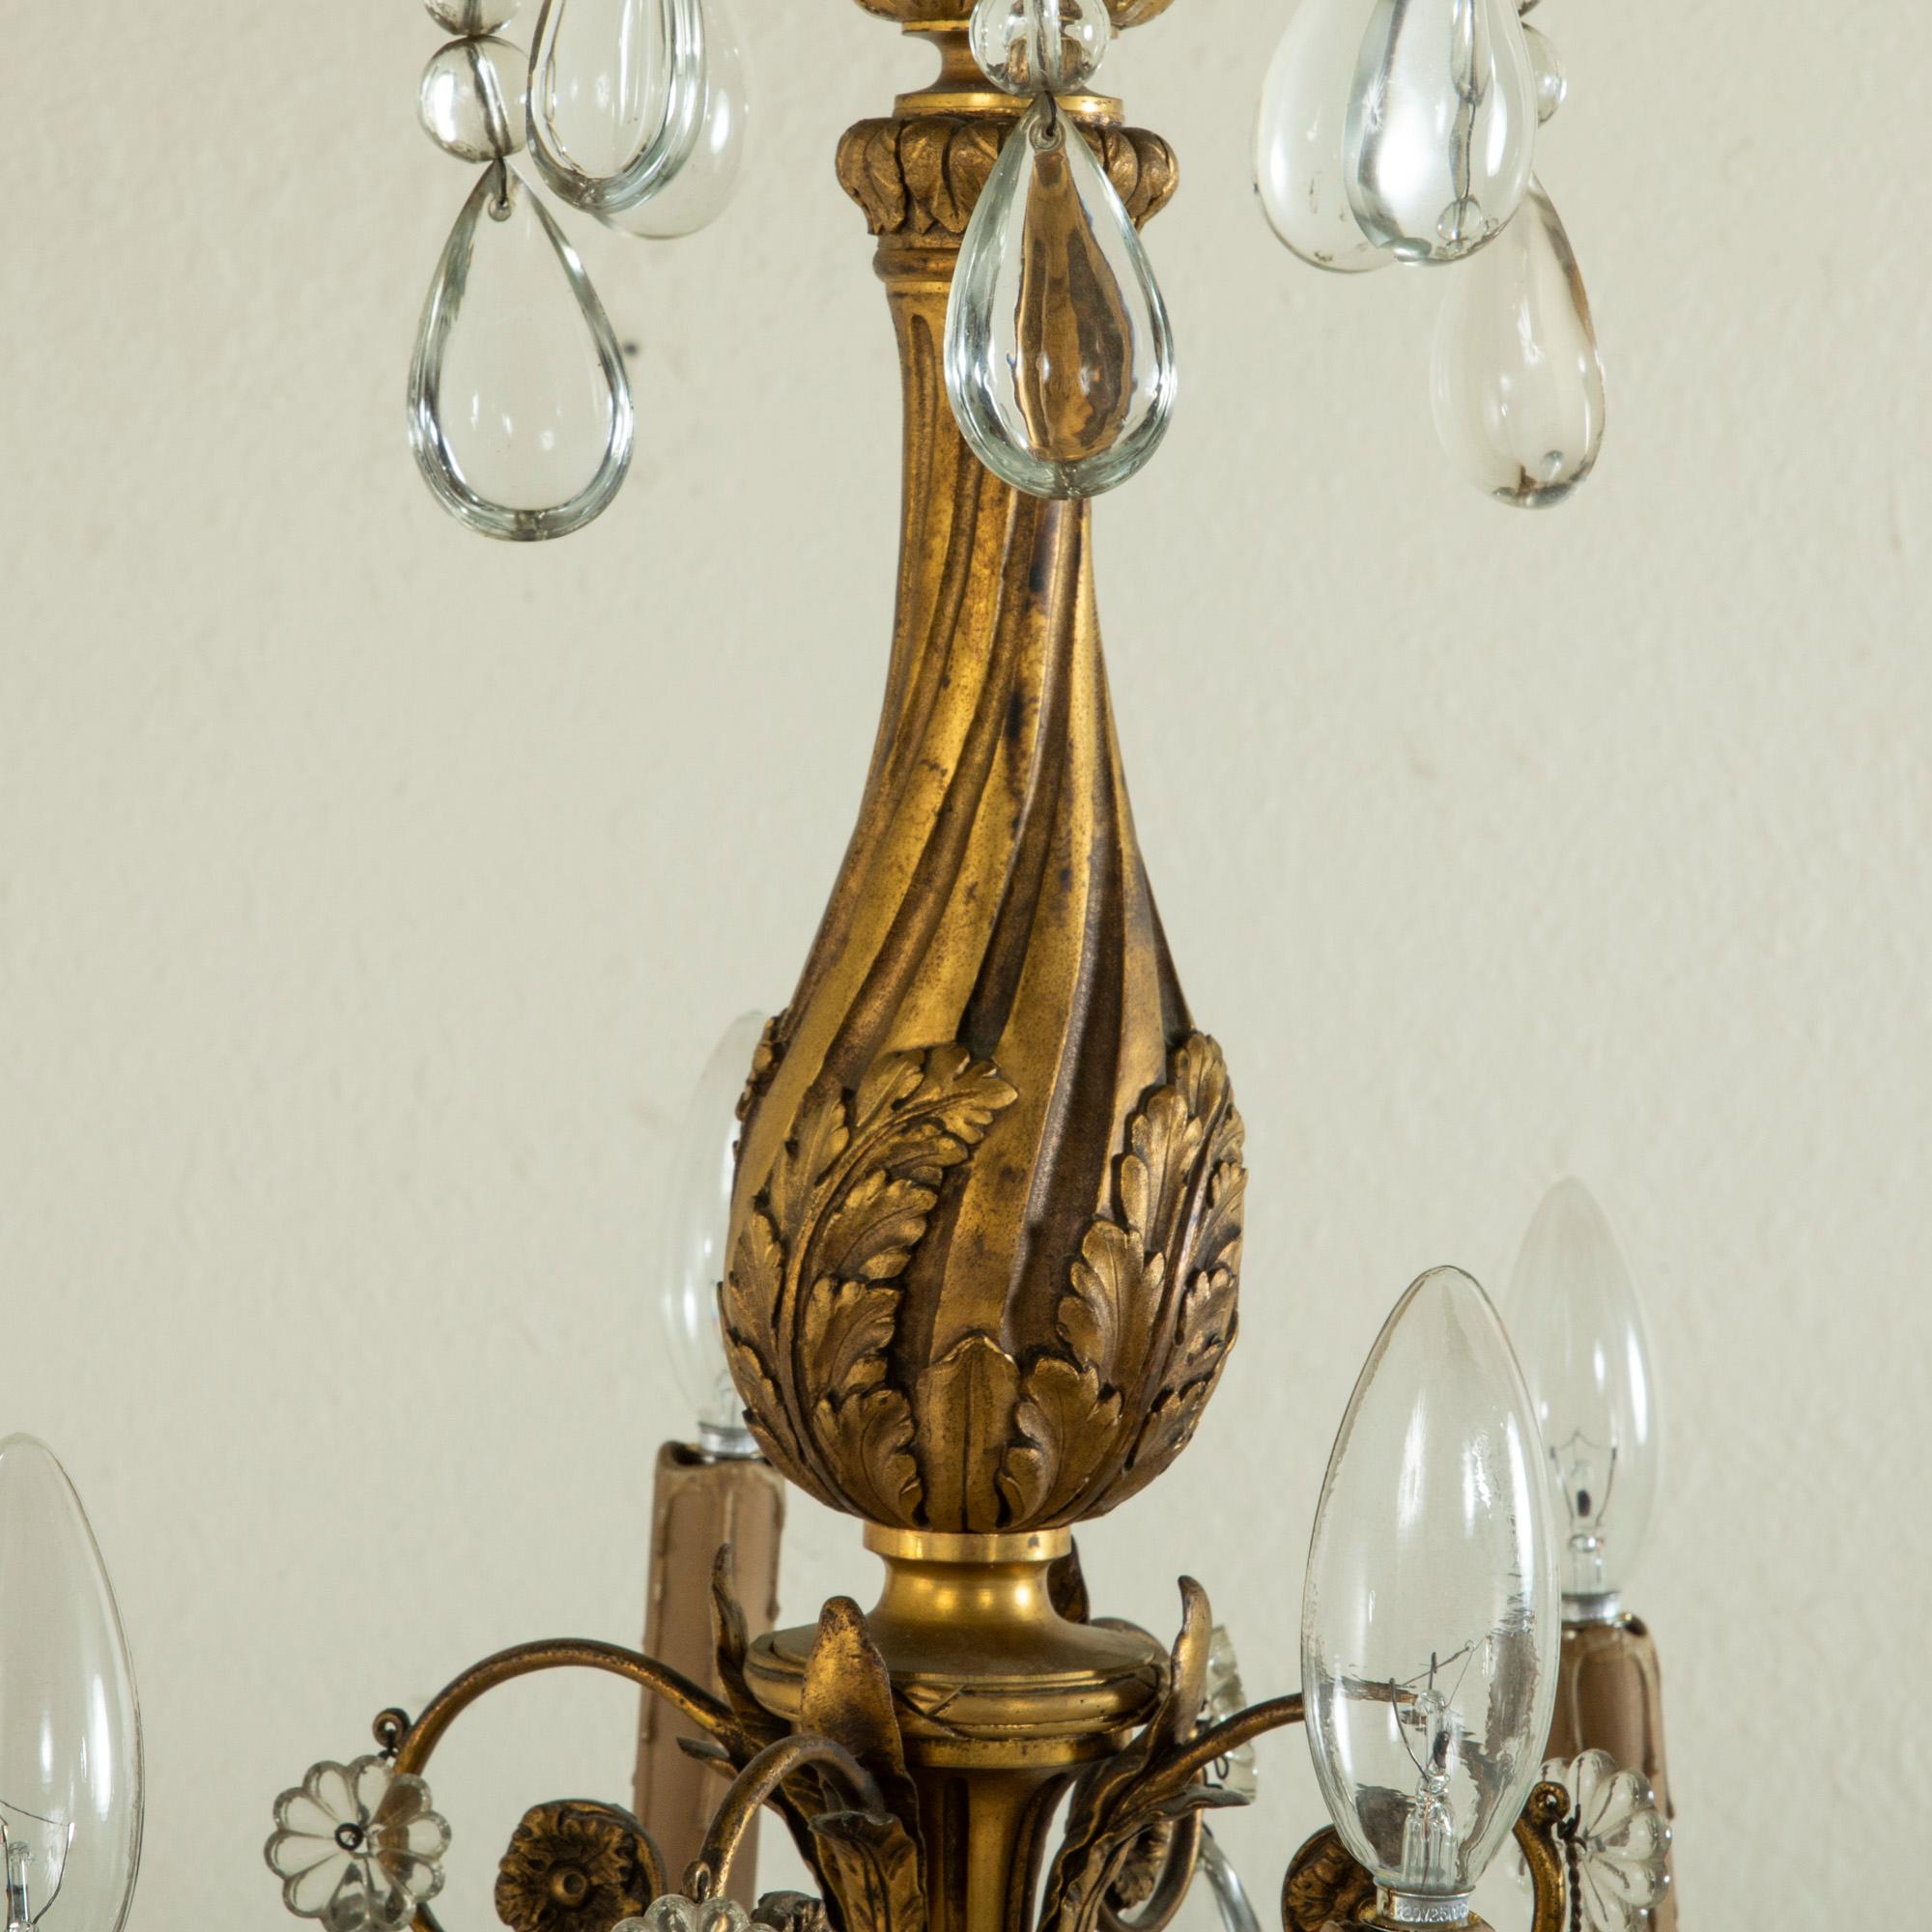 19th Century Nineteenth Century French Napoleon III Period Bronze and Crystal Chandelier